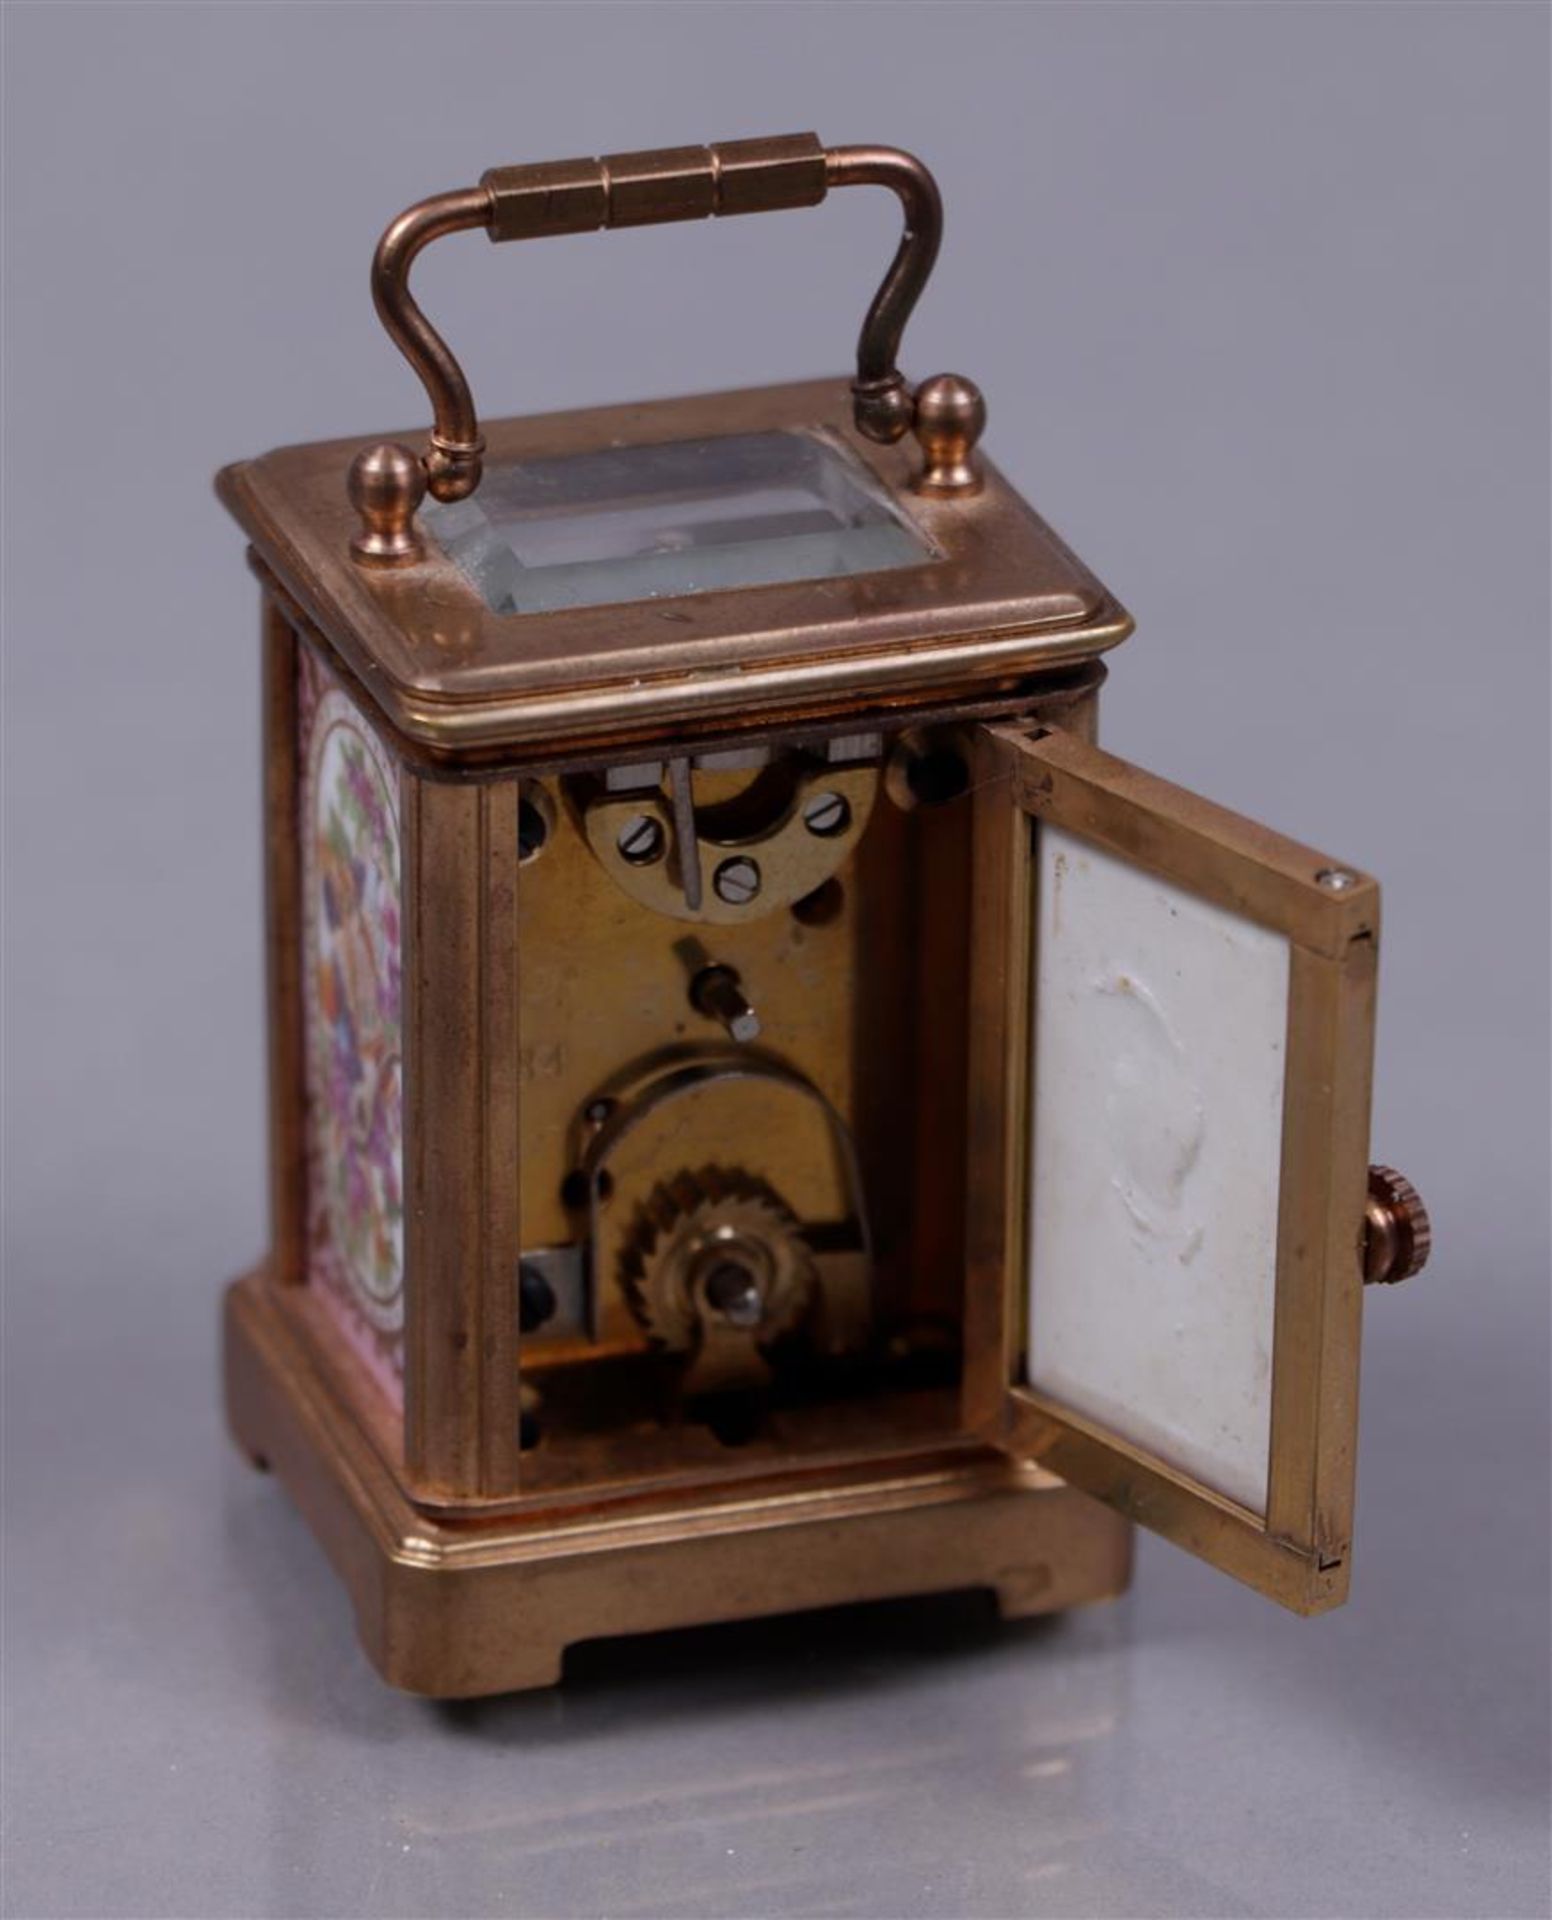 A brass travel alarm clock with polychrome decorated plaques, 20th century.
H.: 5,5 cm. - Image 2 of 2